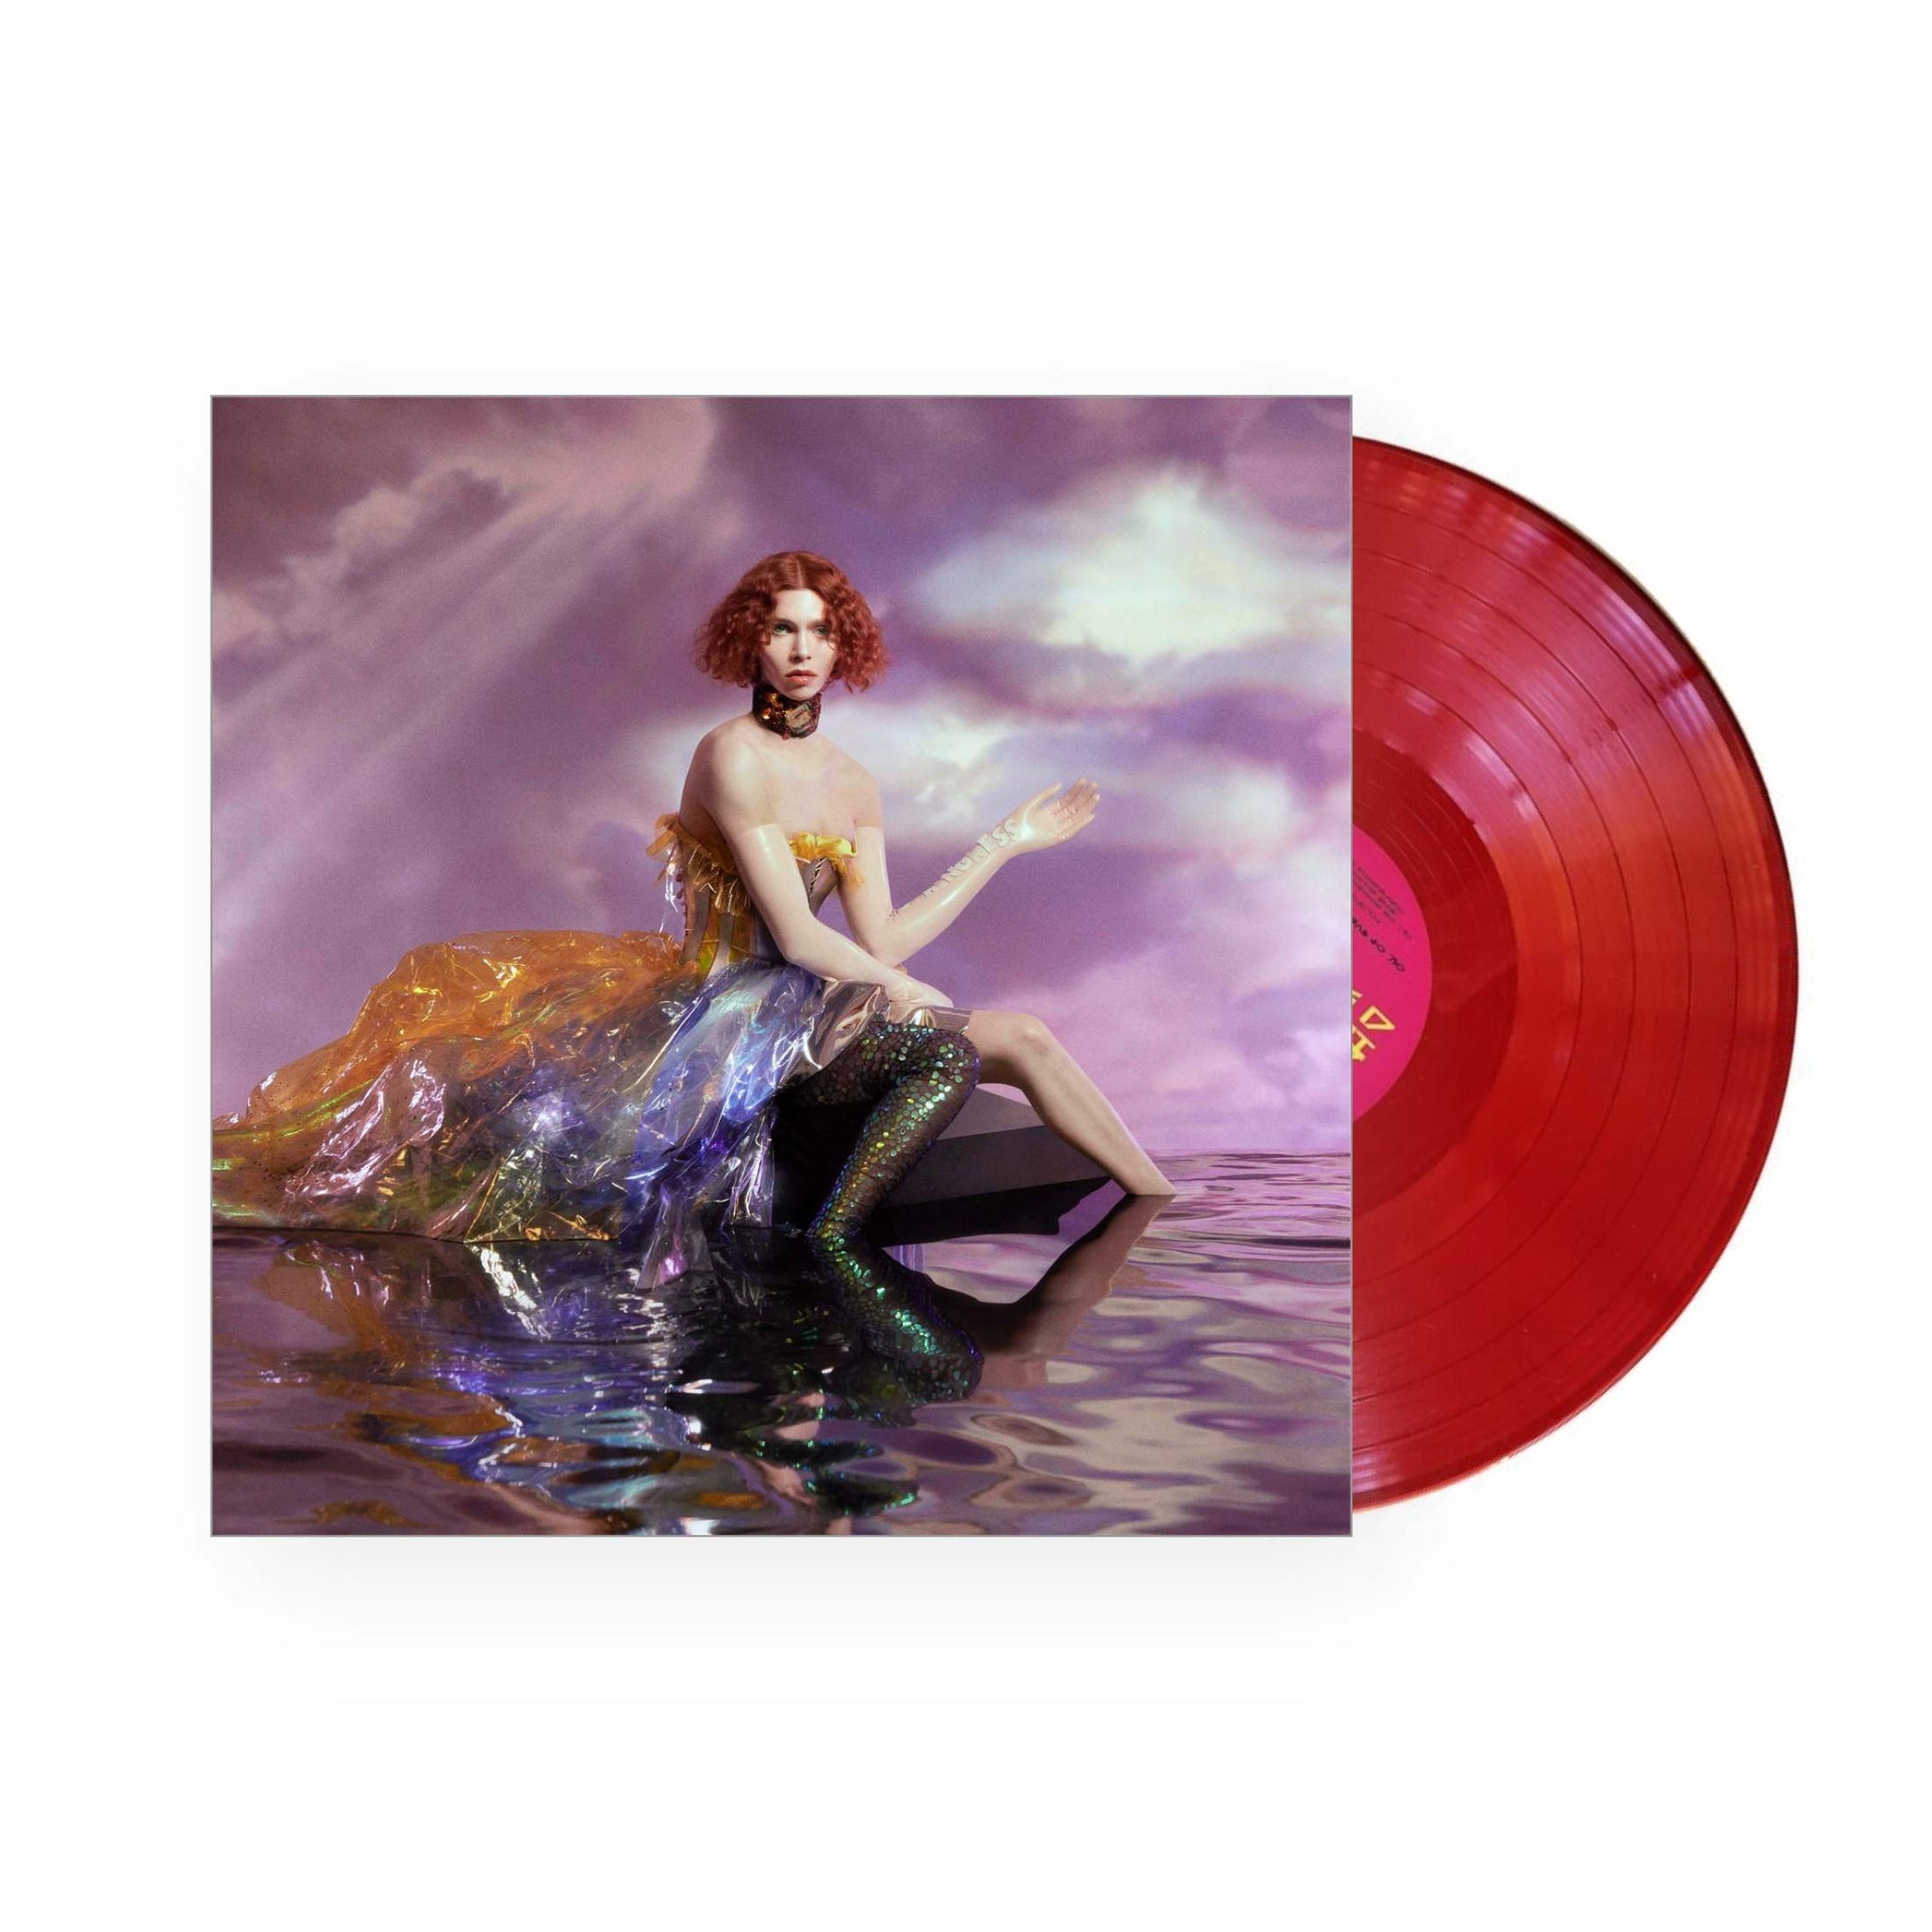 Sophie - Oil Of Every Pearls Un-Insides LP (Red Vinyl)